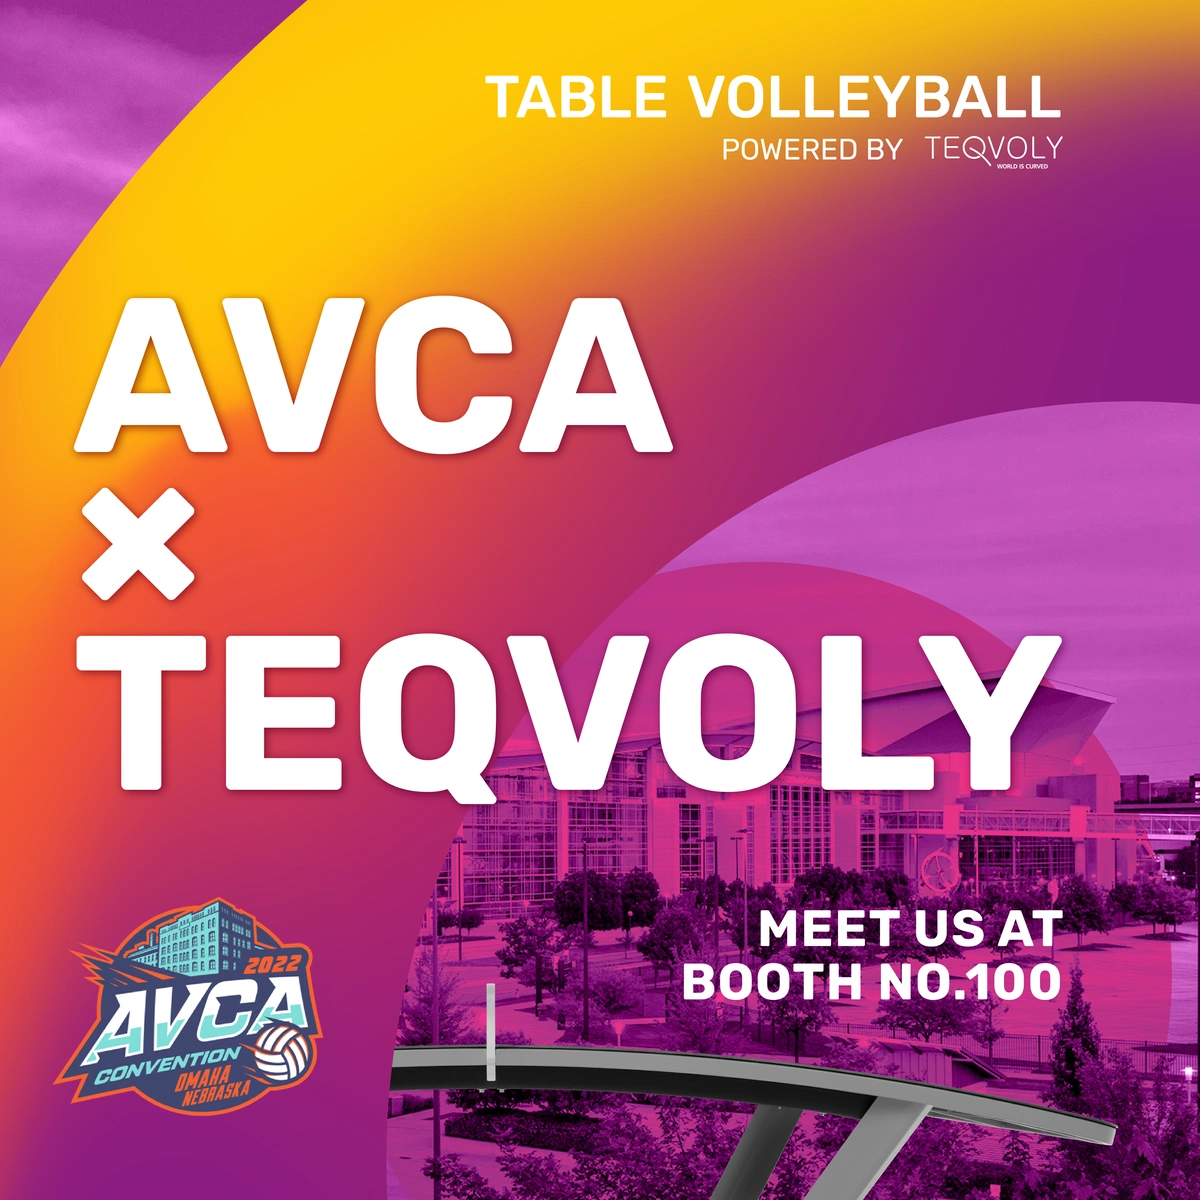 Teqvoly will be represented at the AVCA Coach Convention!